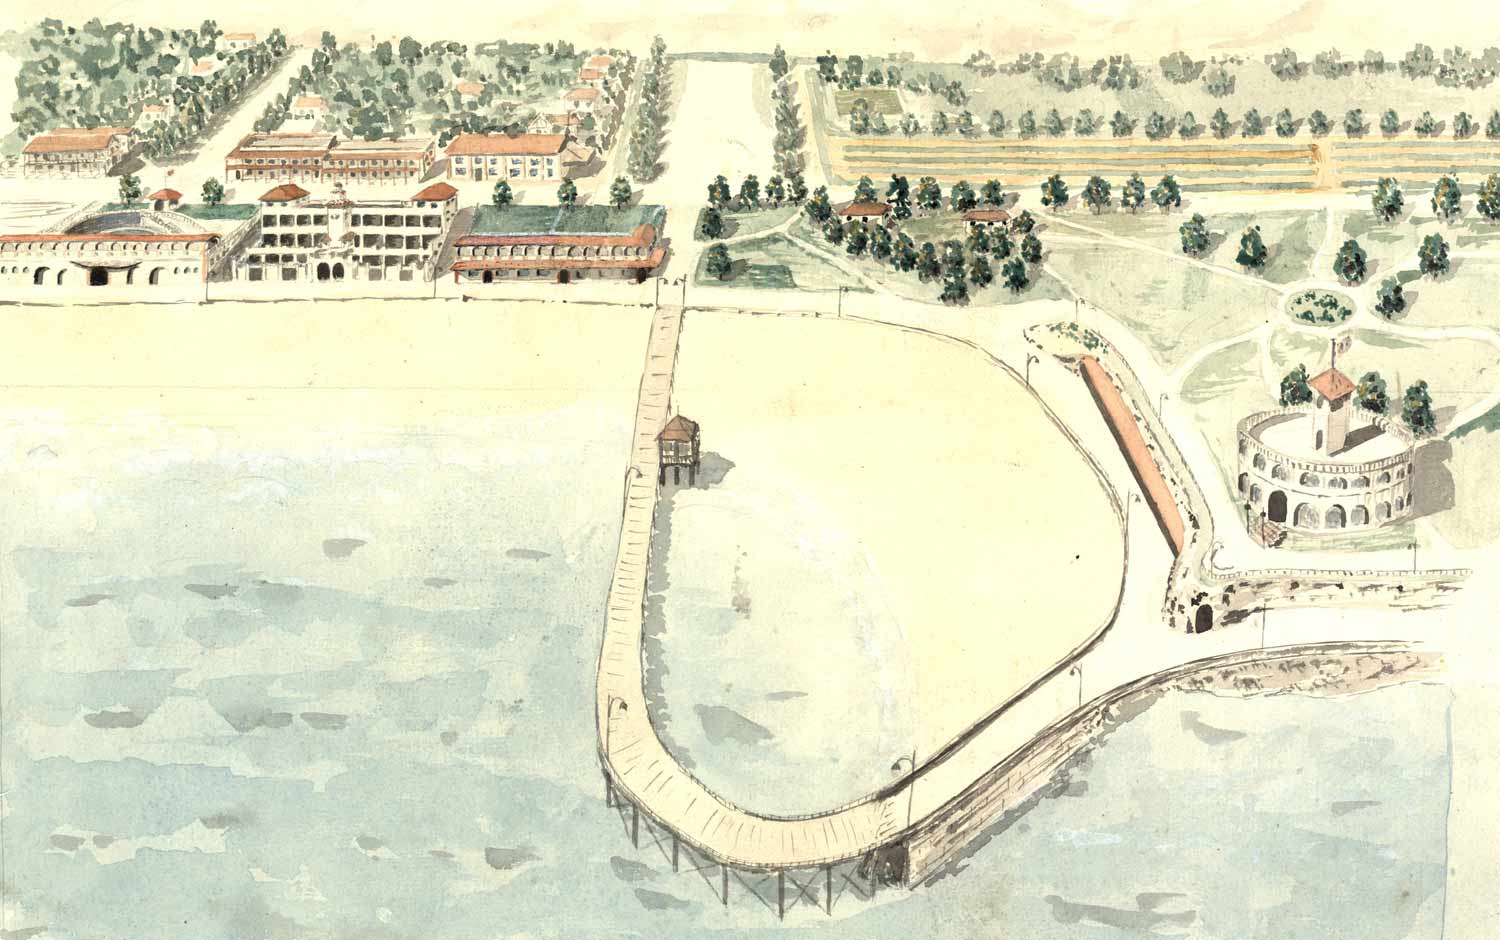 1930 The Ewing Plan recommended sweeping changes to the beachfront